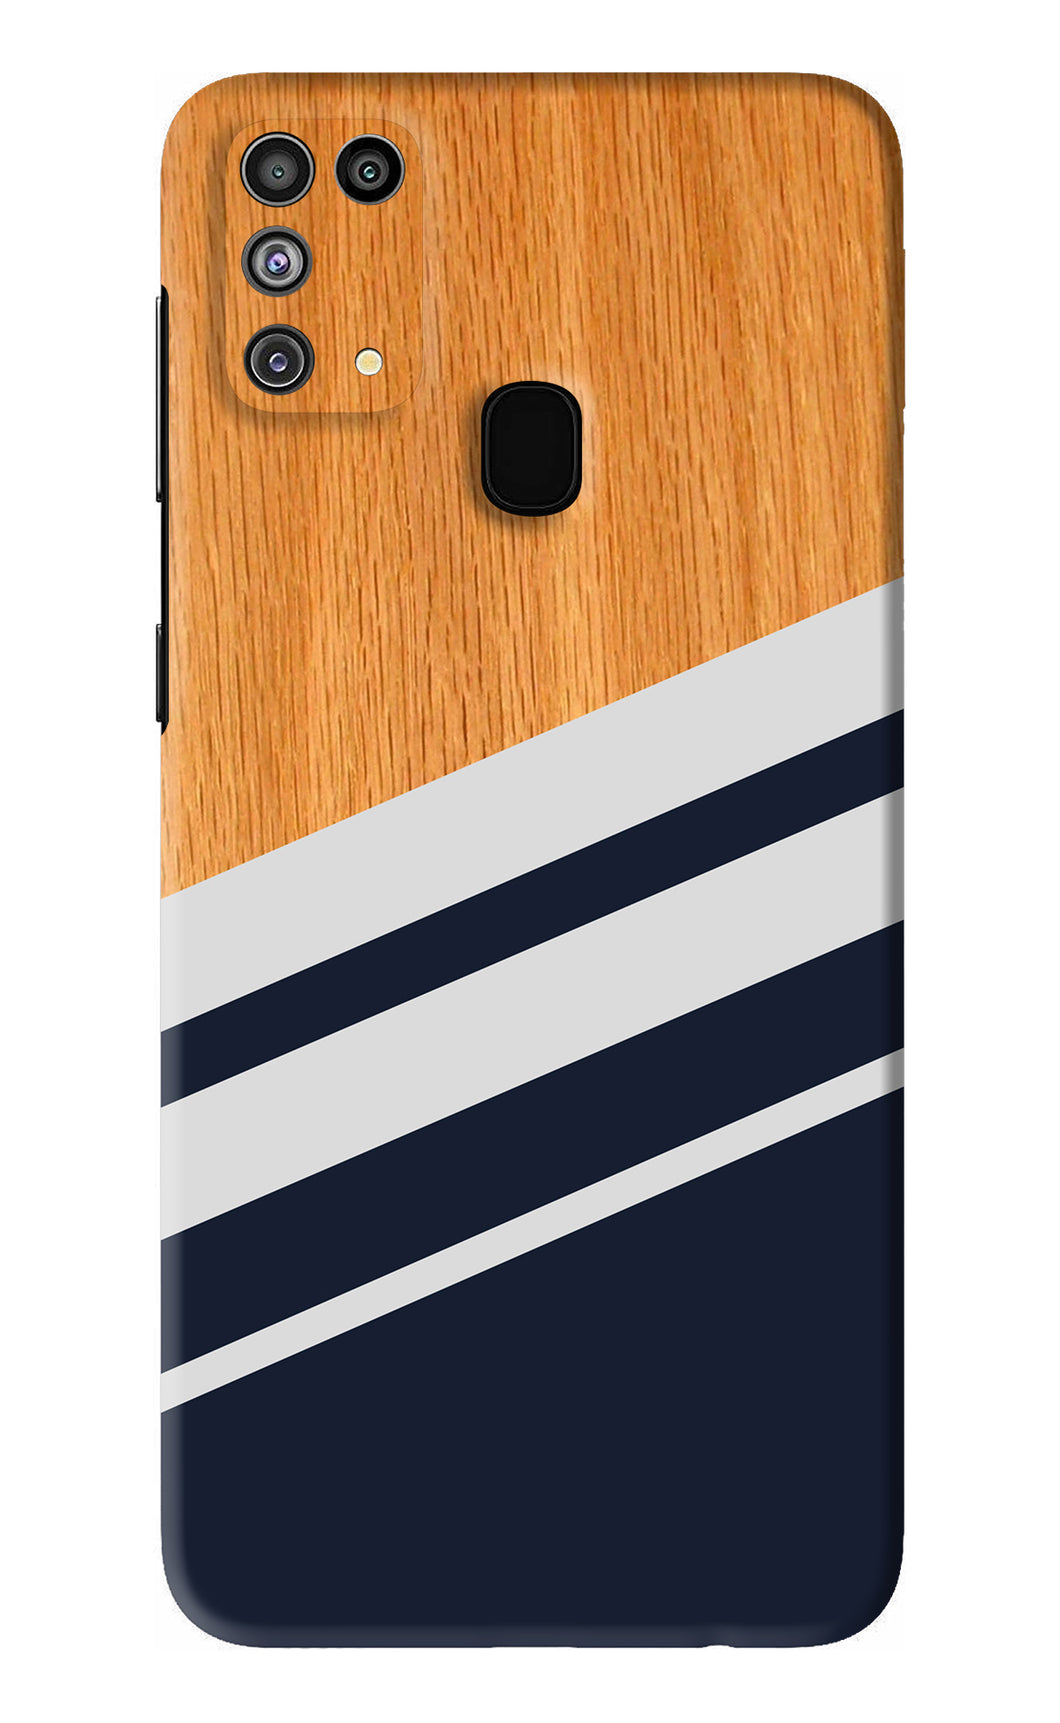 Black And White Wooden Samsung Galaxy M31 Back Skin Wrap